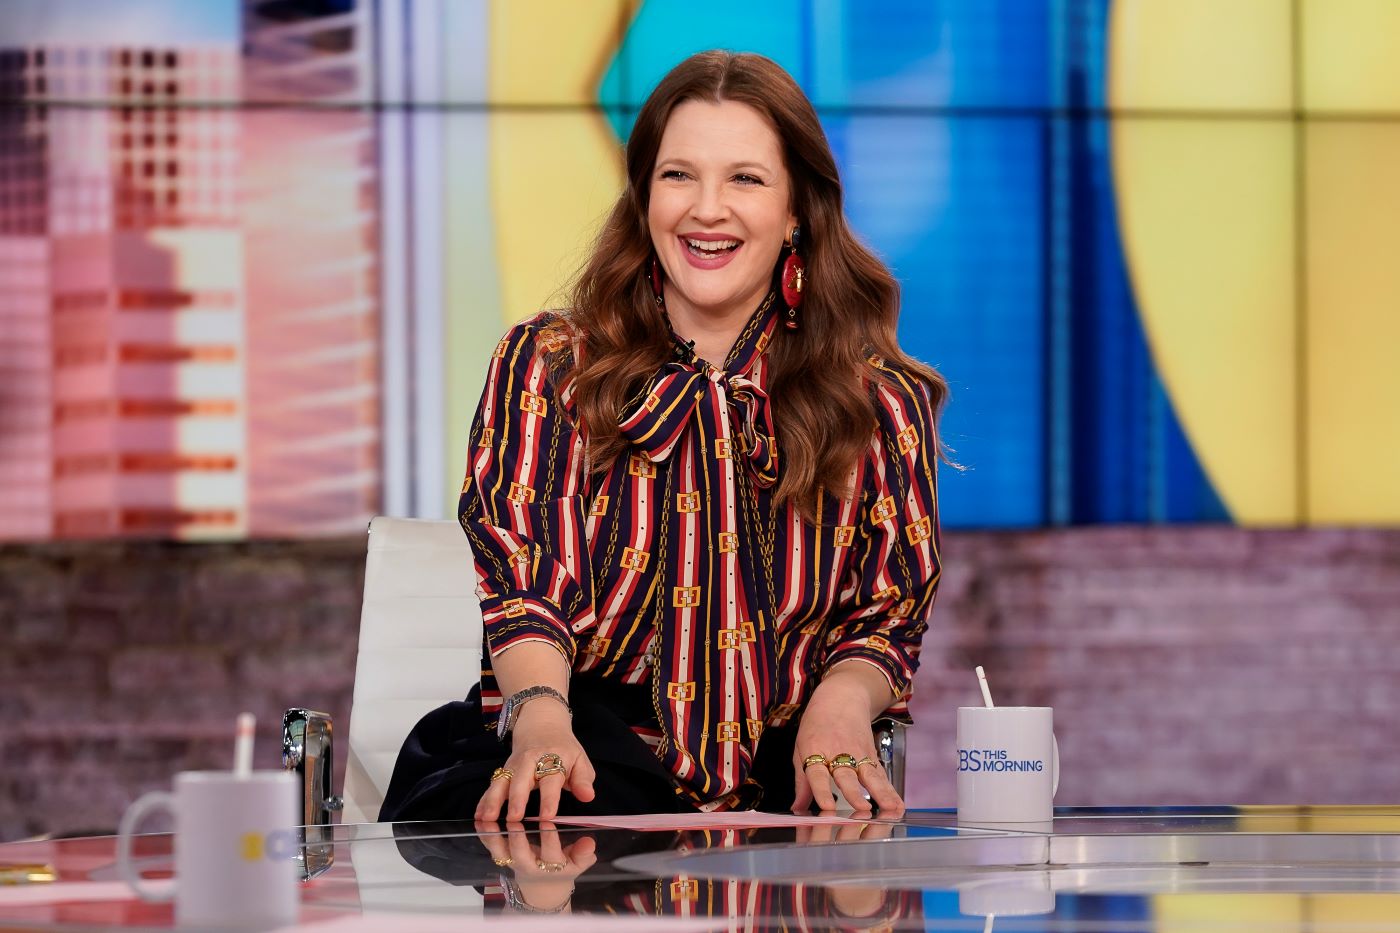 Drew Barrymore sitting in a black and orange stripped shirt in front of a glass desk with a red, blue, and yellow blurred background.